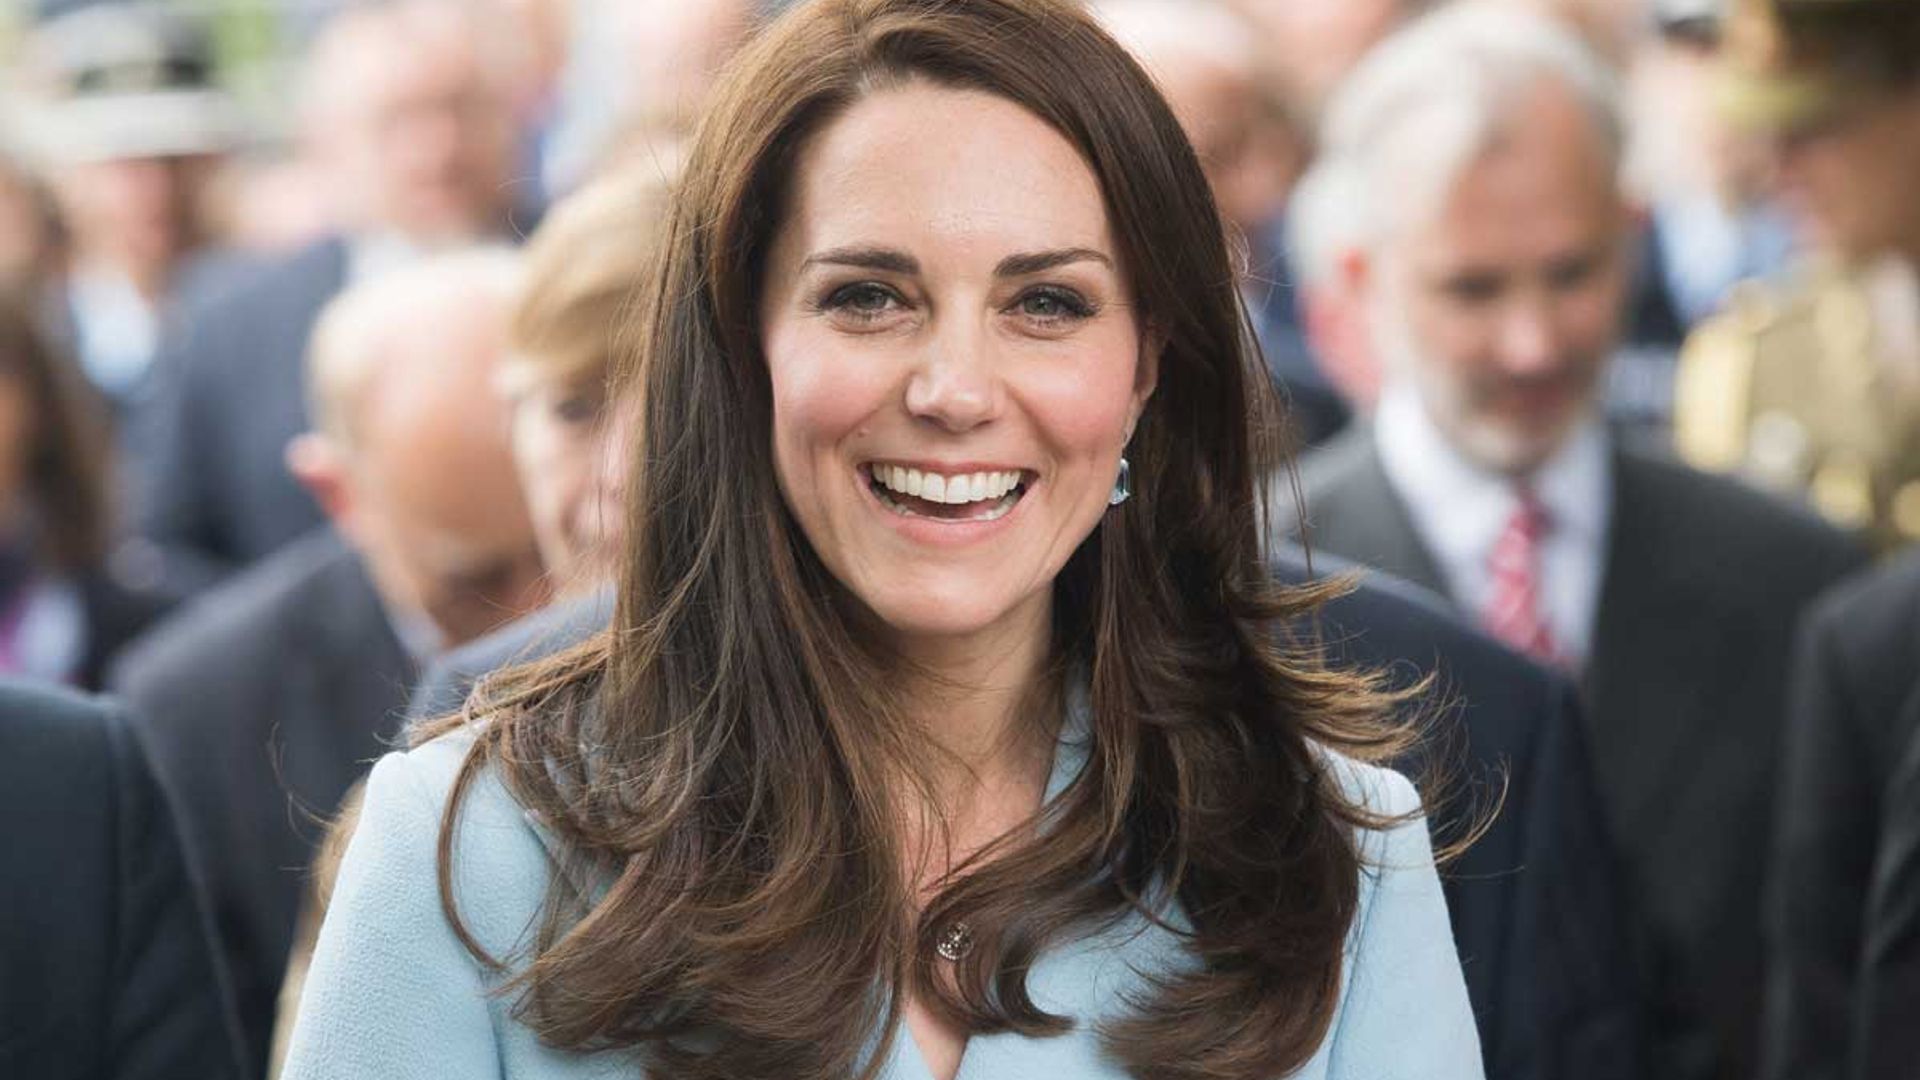 Run to Selfridges because Kate Middleton's favourite glittery heels are ...